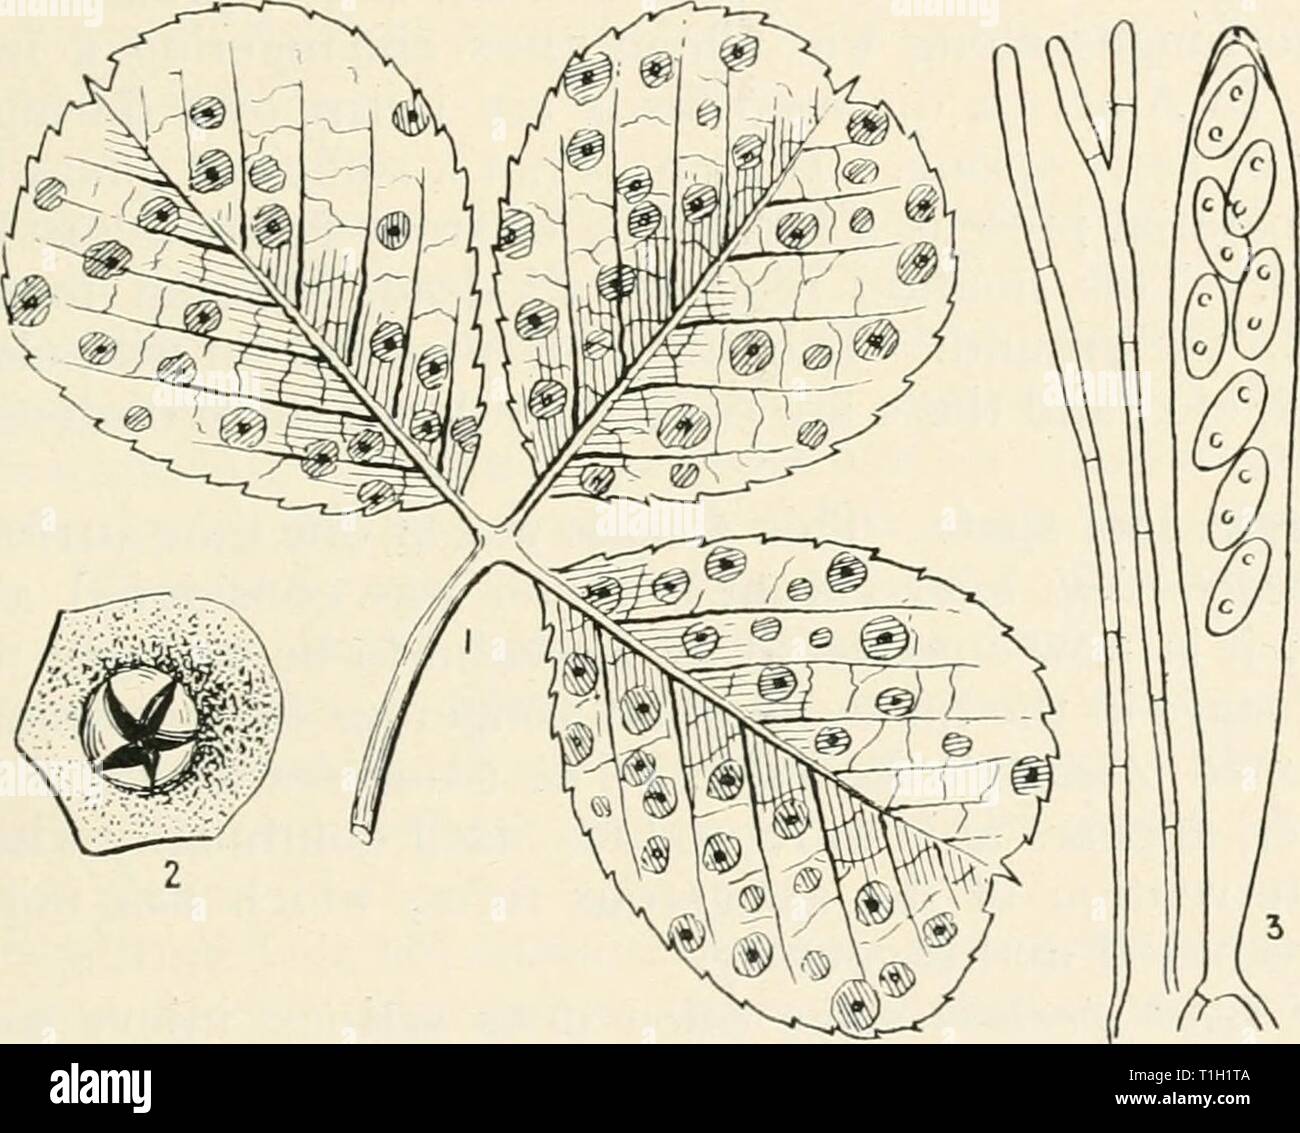 Diseases of cultivated plants and Diseases of cultivated plants and trees  diseasesofcultiv00massuoft Year: [1910?]  PSEUUOPEZIZA 277 The disease is favoured by damp soil and a damp atmo- sphere, being most abundant near the wind-shelters formed by scarlet-runners. It is recommended that the use of scarlet-runners be aboUshed, and that French beans be used instead as wind-screens. Oudemans and Konitig, Konin. Akad, Wetcnsch, te Amster- dam, p. 48, June 1903. PSEUDOPEZIZA (FcKL.) Ascophore erumpent, sessile, glabrous, minute; asci clavate, 4-8 spored; spores hyaline, smooth, elongated, con- tin Stock Photo